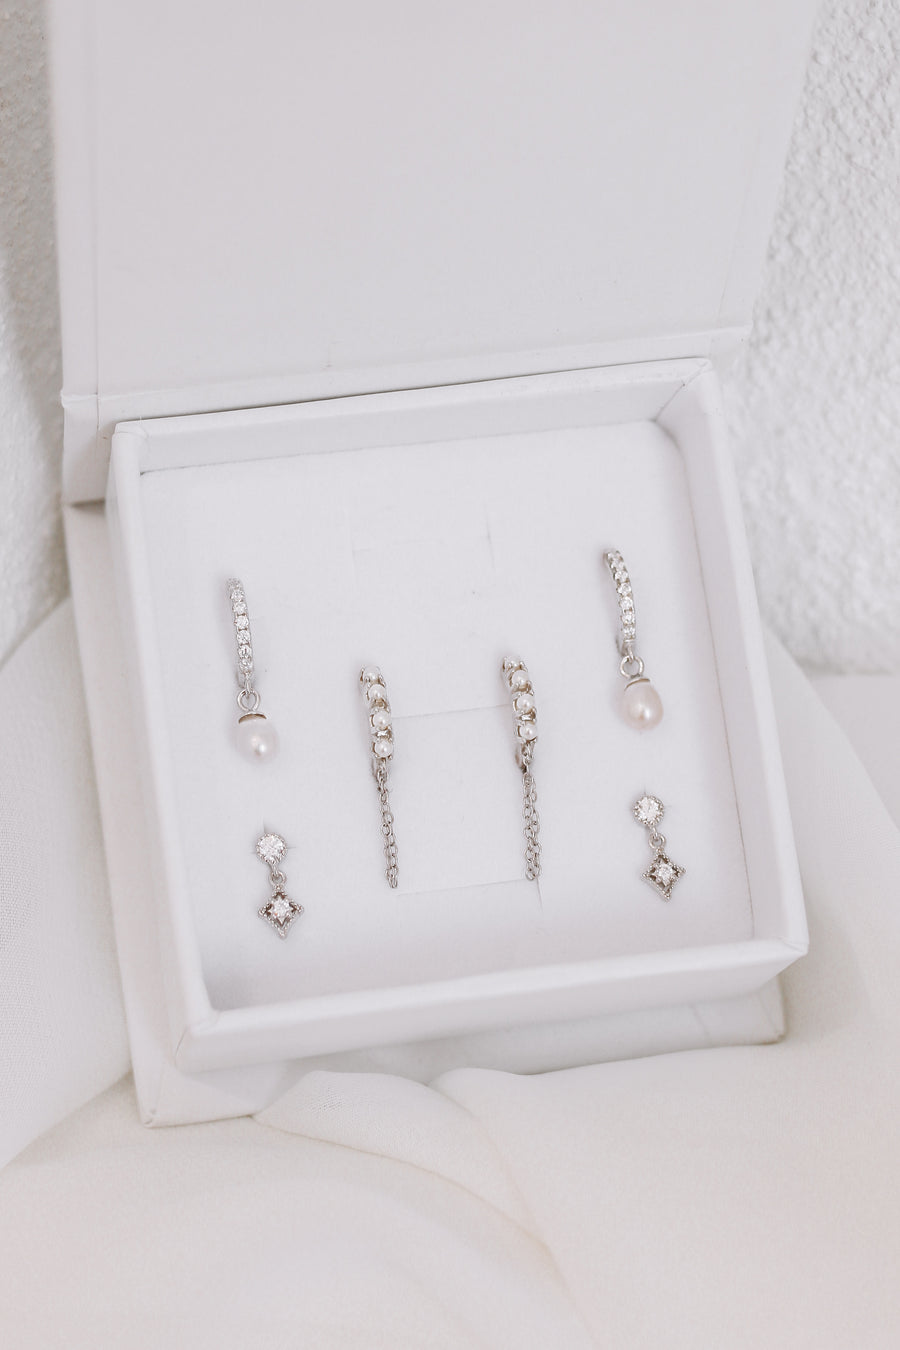 Maddee Bundle - Gold or Silver Sterling Silver Earring Stack